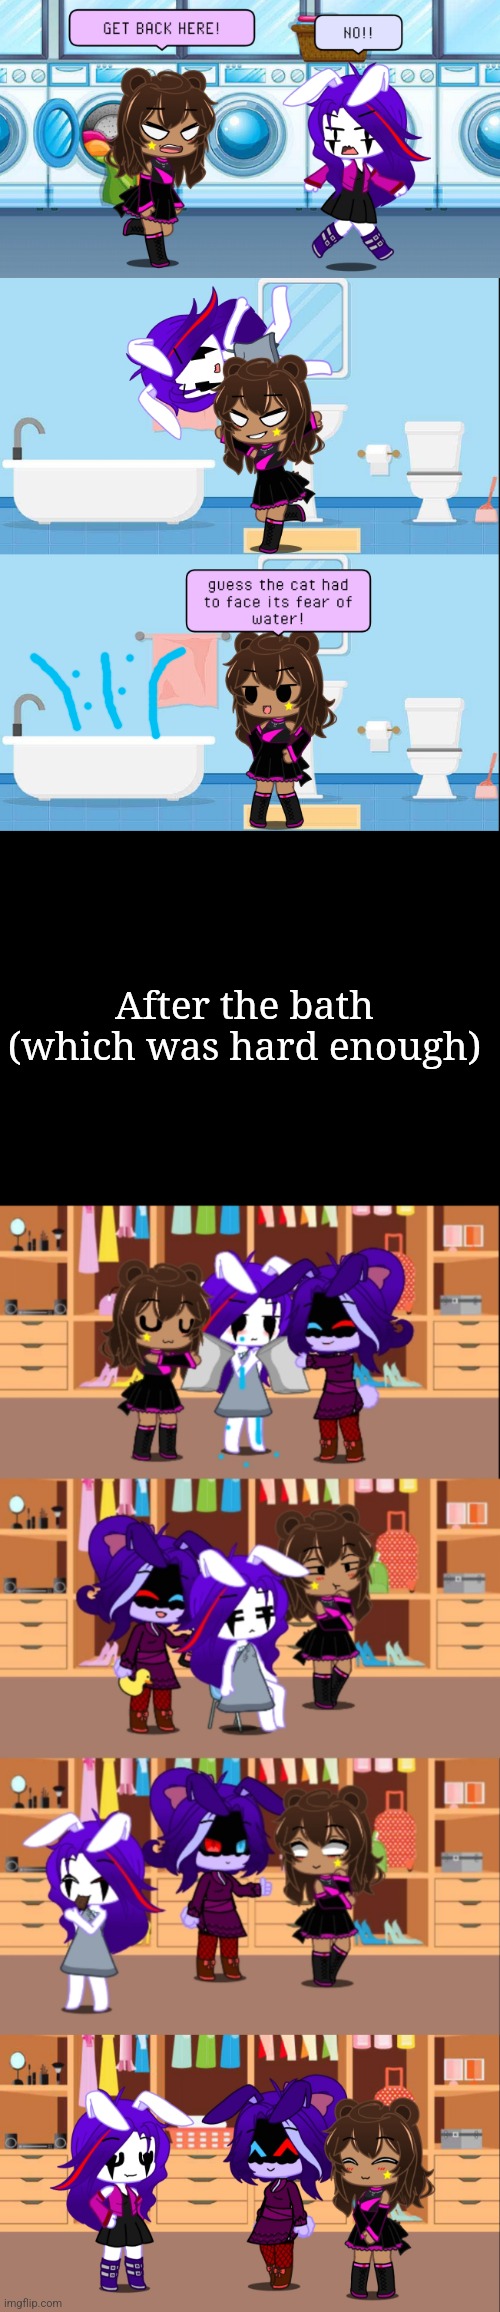 After the bath (which was hard enough) | made w/ Imgflip meme maker